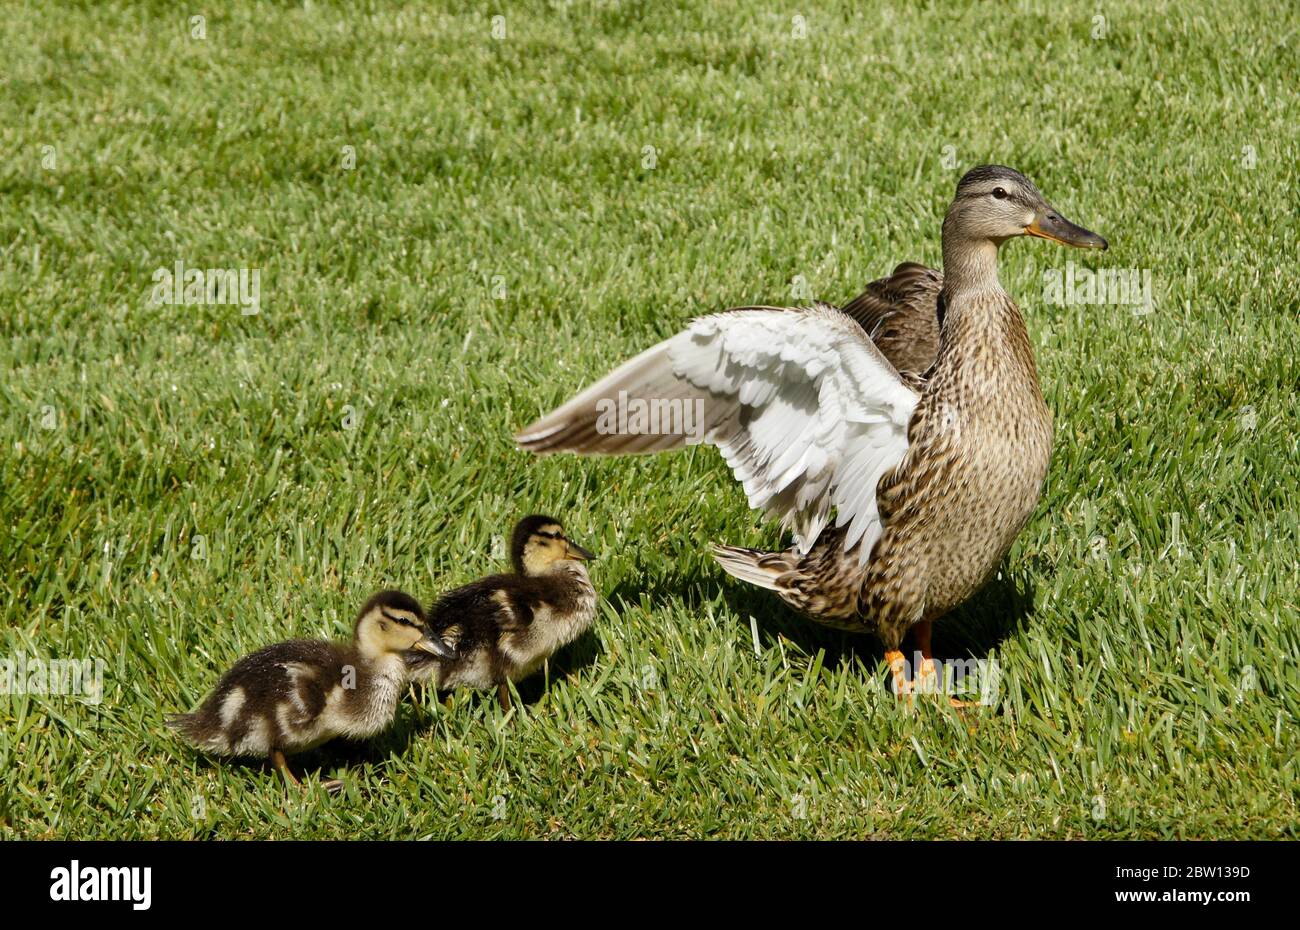 Mallard ducklings with crops full of stored food standing in grass next to female (hen) stretching and flapping her wings, Southern California Stock Photo